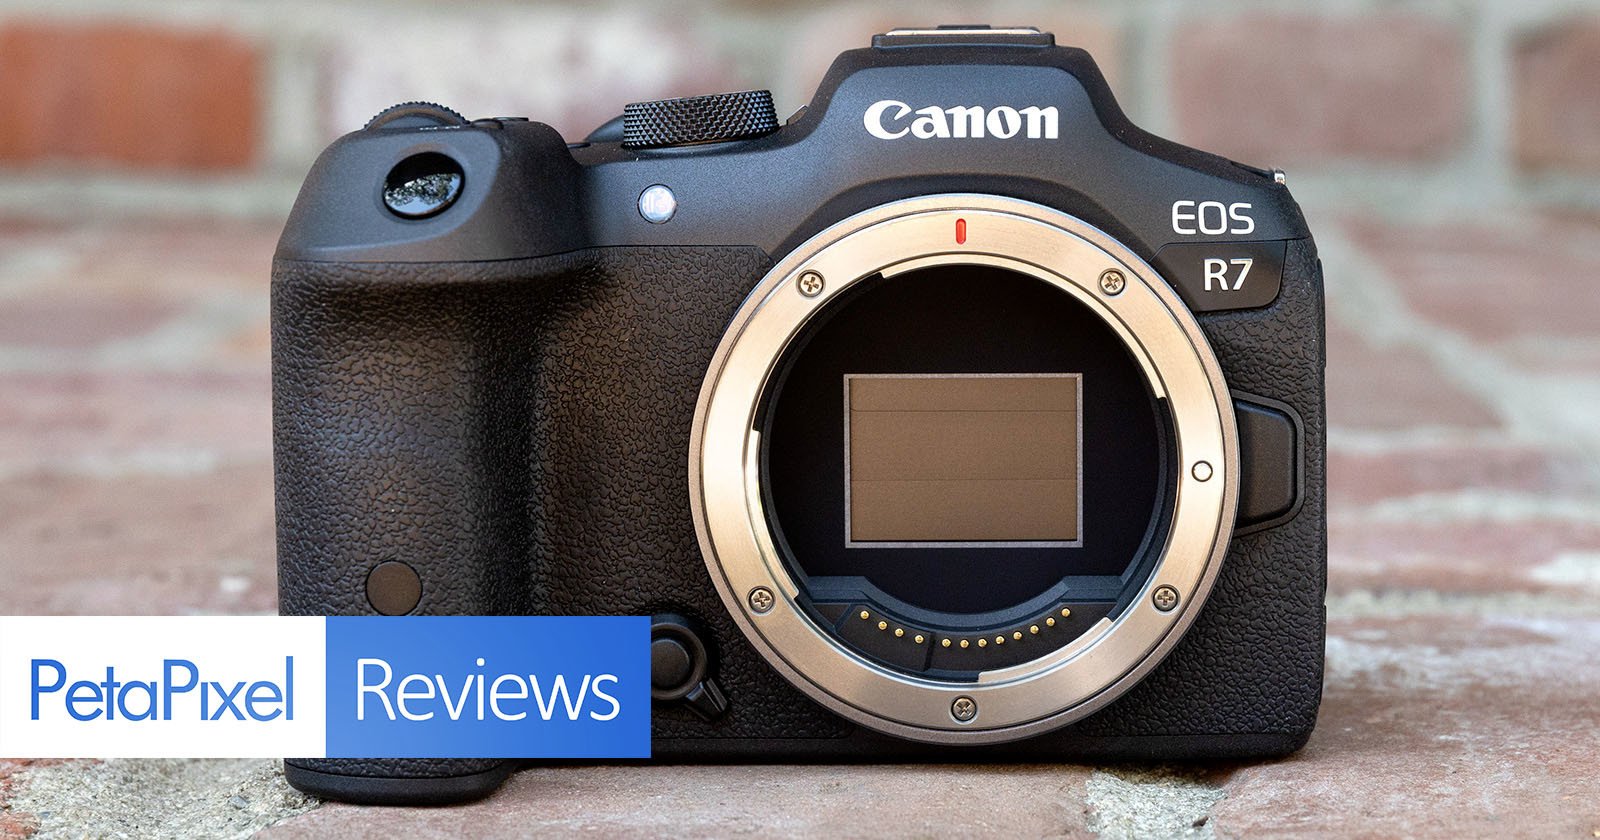  canon eos review one best cameras 